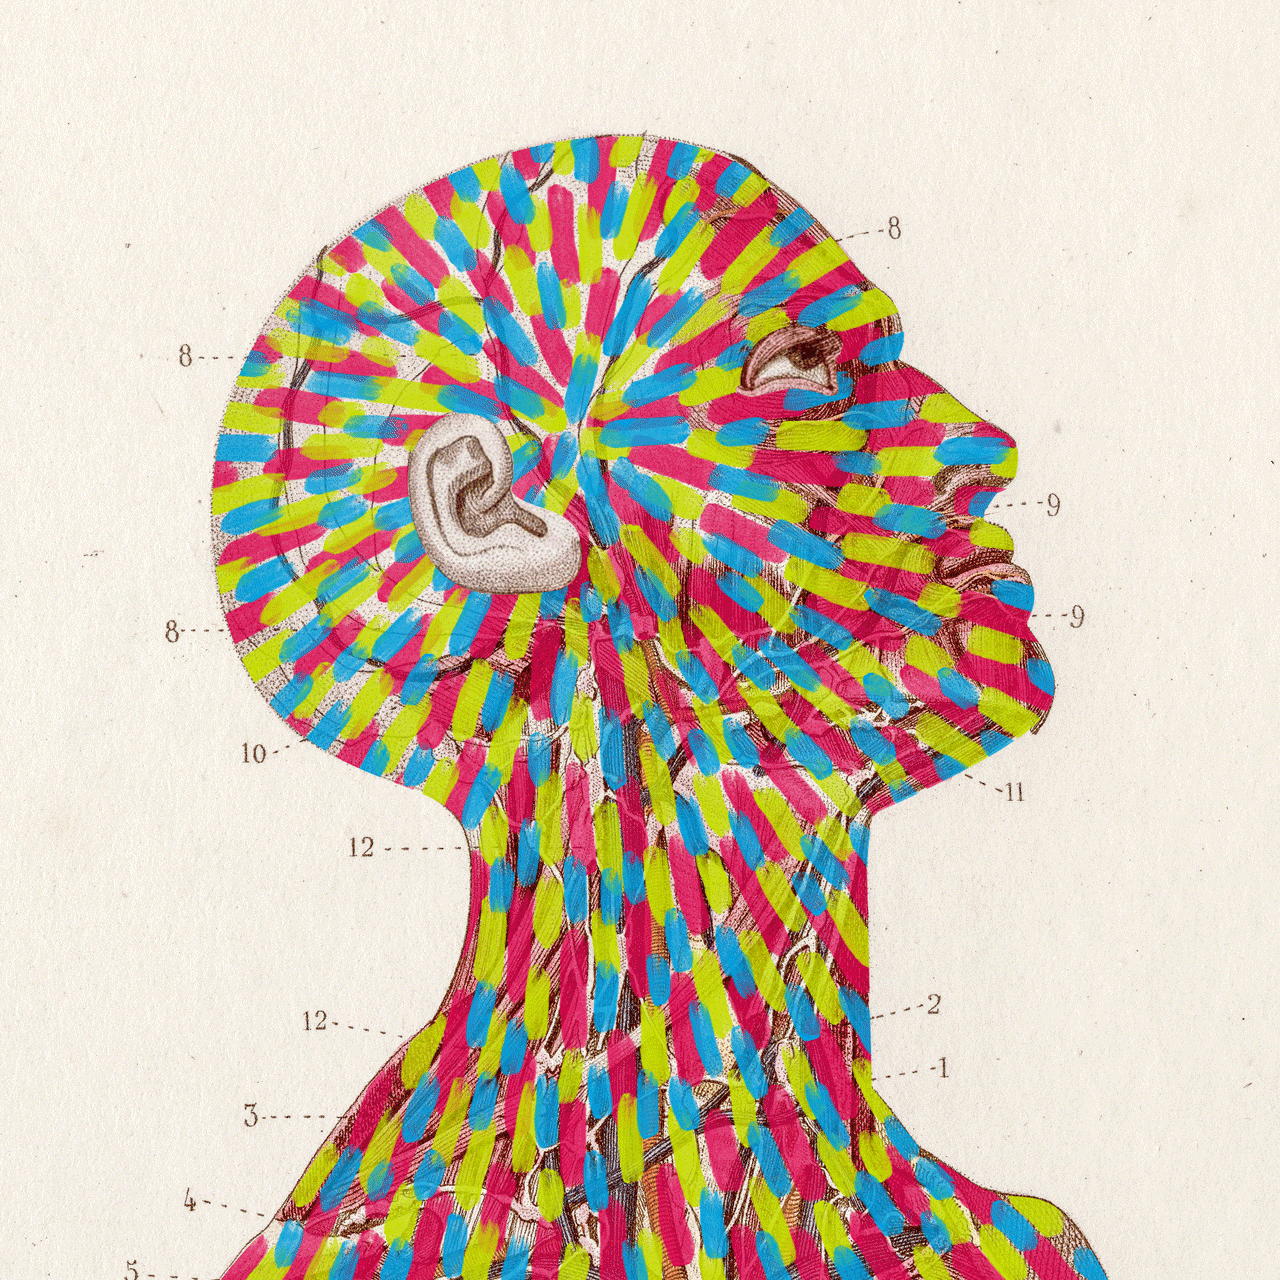 Colors swirl on an animated illustration of a human head and neck.